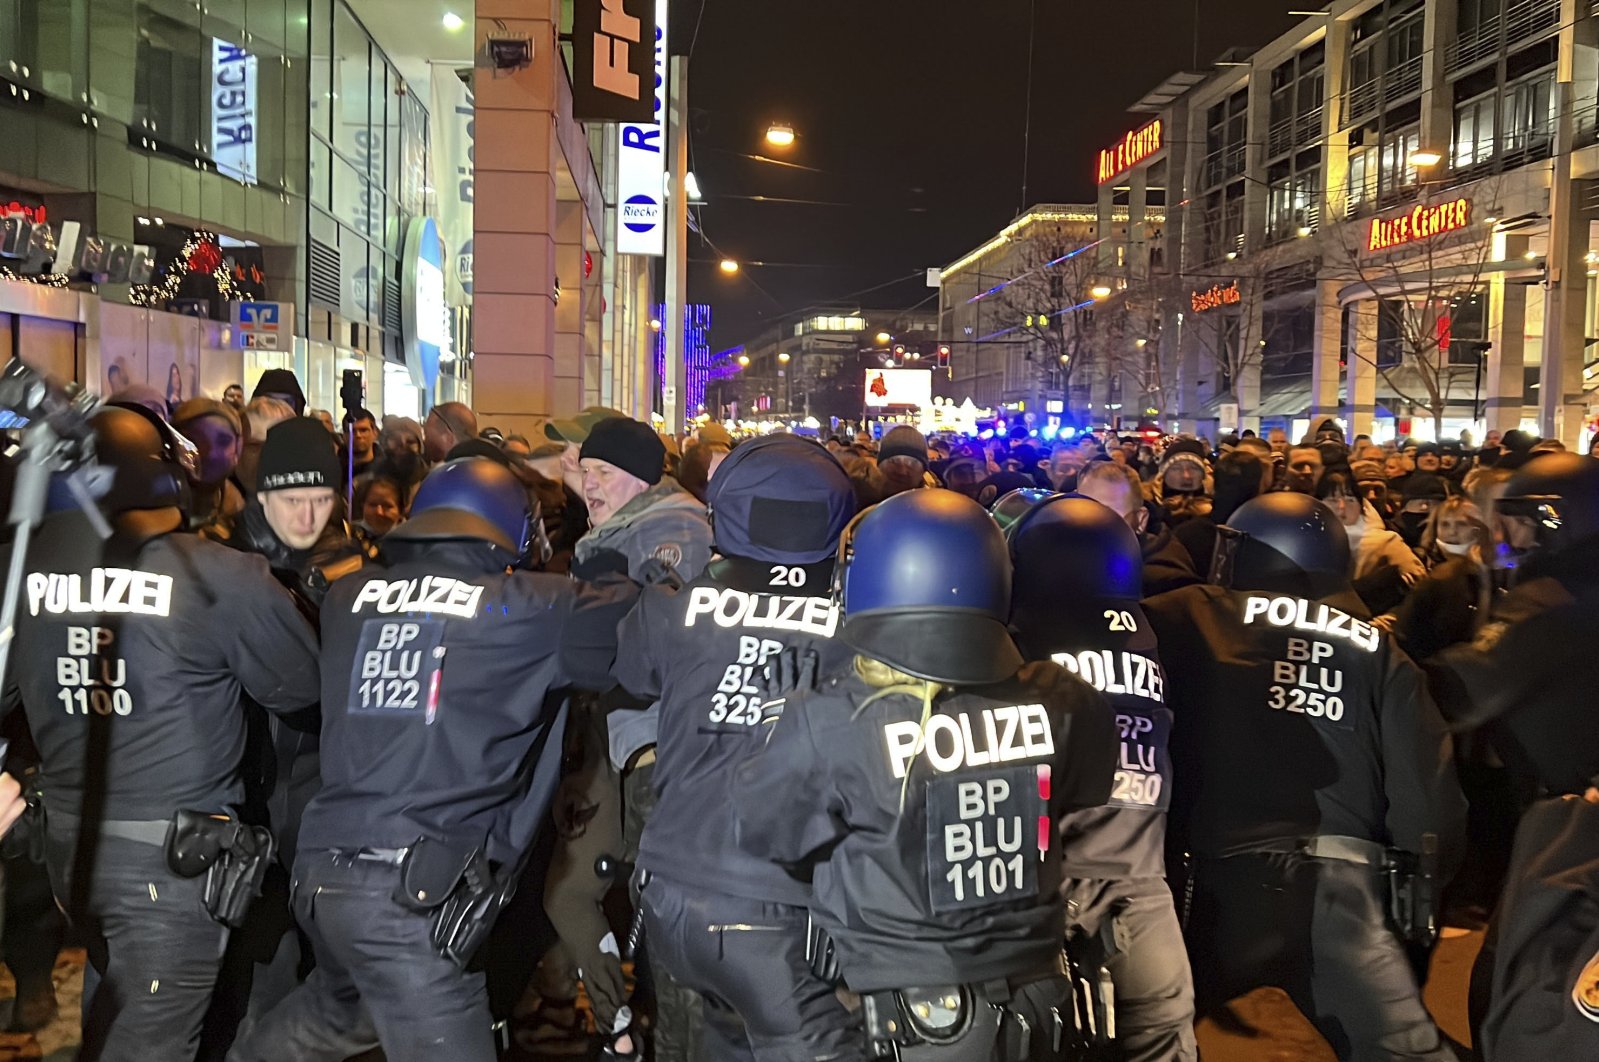 Protestors and police clash during a protest against COVID-19 measures in Magdeburg, Germany, Jan. 24, 2022. (AP Photo)